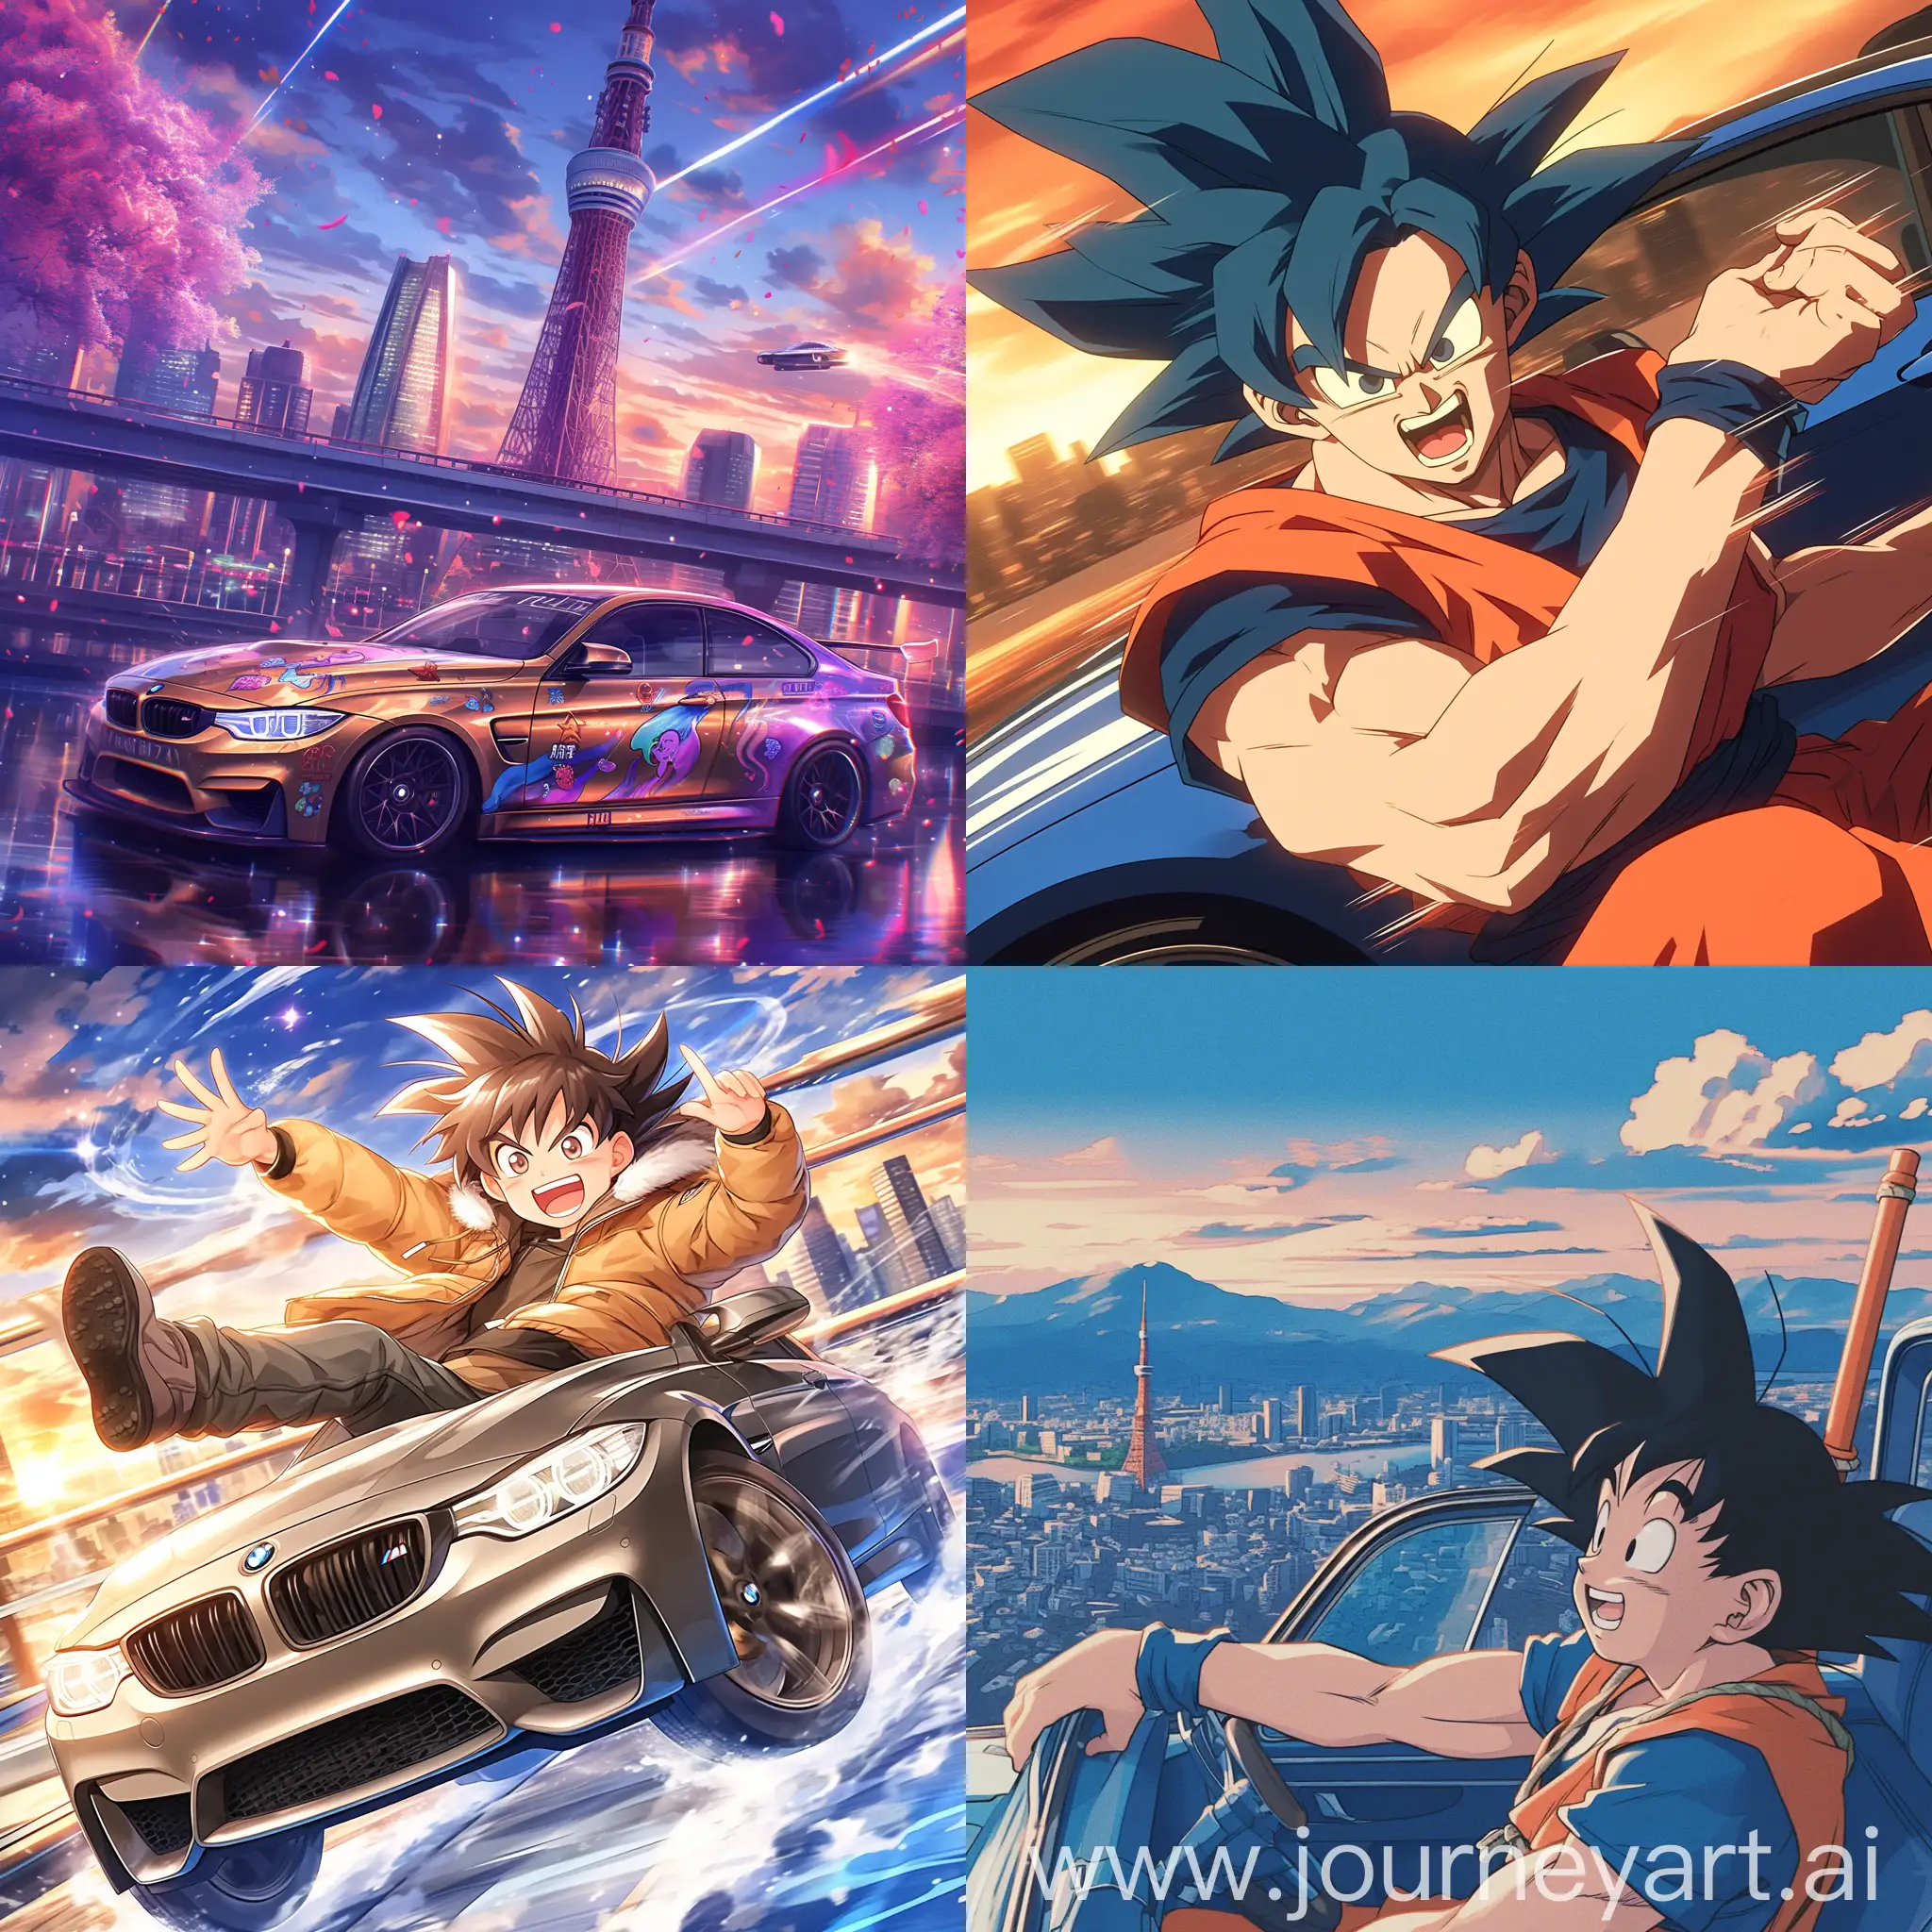 Goku from Dragon Ball, vibrant and dynamic pose, taking photographs with a sleek BMW M3, anime style, action-packed, high-energy, vivid colors, detailed background showcasing a futuristic Tokyo cityscape, intense expressions, speed lines effect, sunset ambiance --ar 1:1 --s 600 --c 15 --niji 6